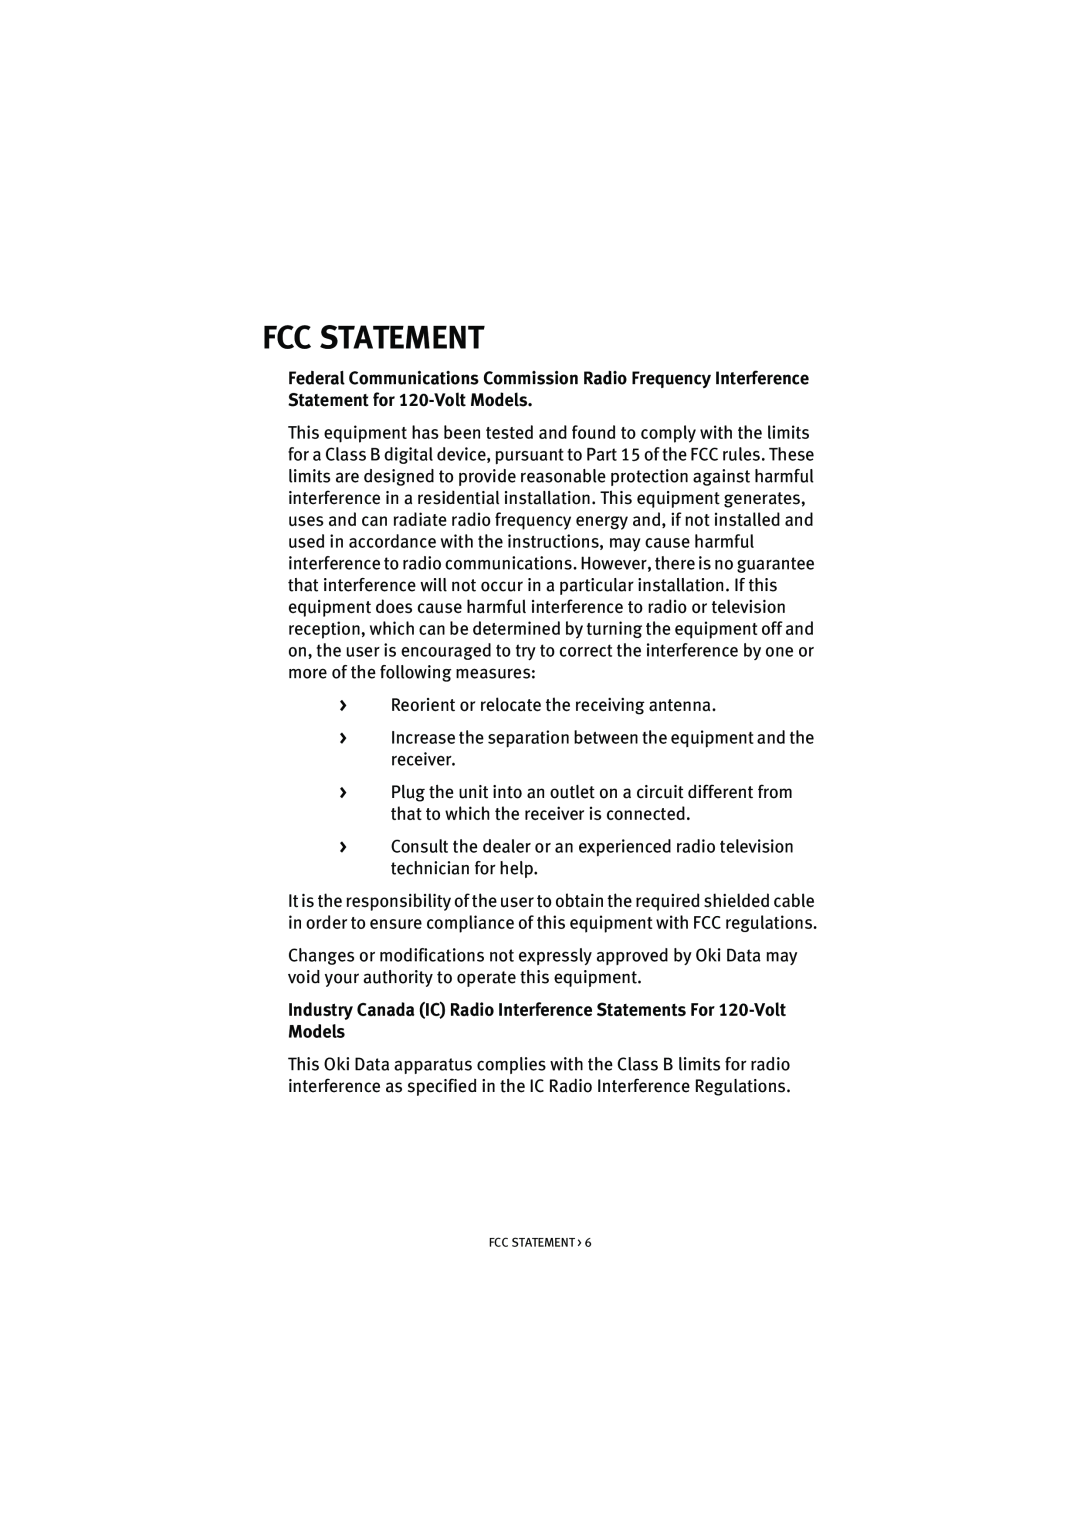 Oki S700 manual Fcc Statement, Industry Canada IC Radio Interference Statements For 120-Volt Models 